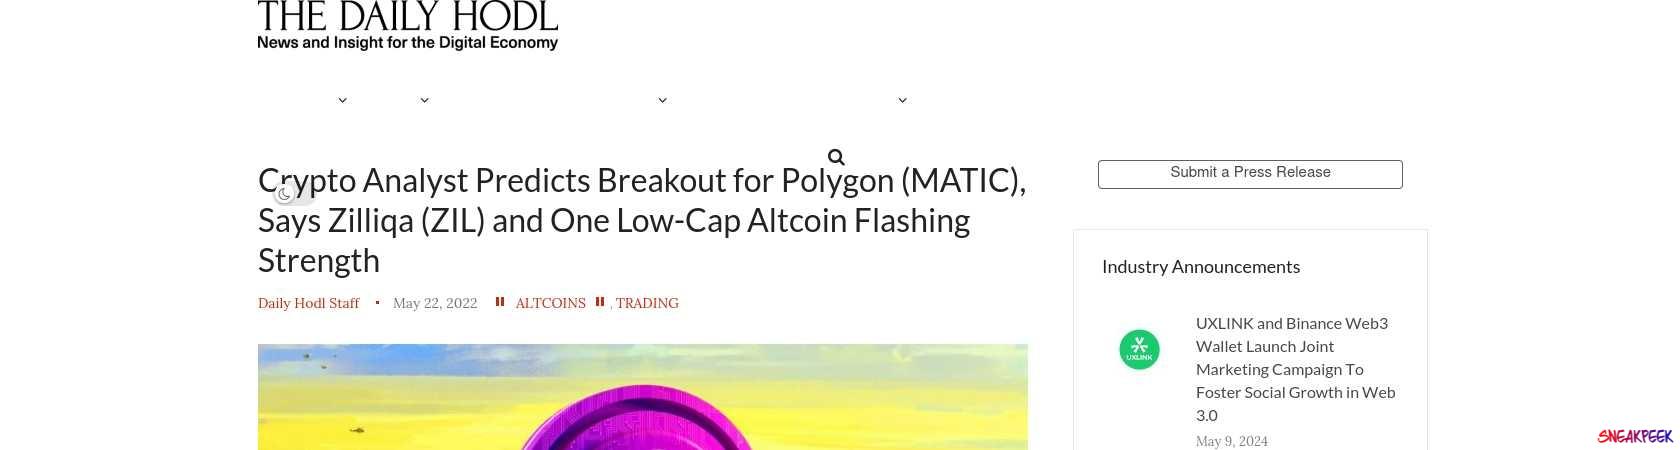 Read the full Article:  ⭲ Crypto Analyst Predicts Breakout for Polygon (MATIC), Says Zilliqa (ZIL) and One Low-Cap Altcoin Flashing Strength